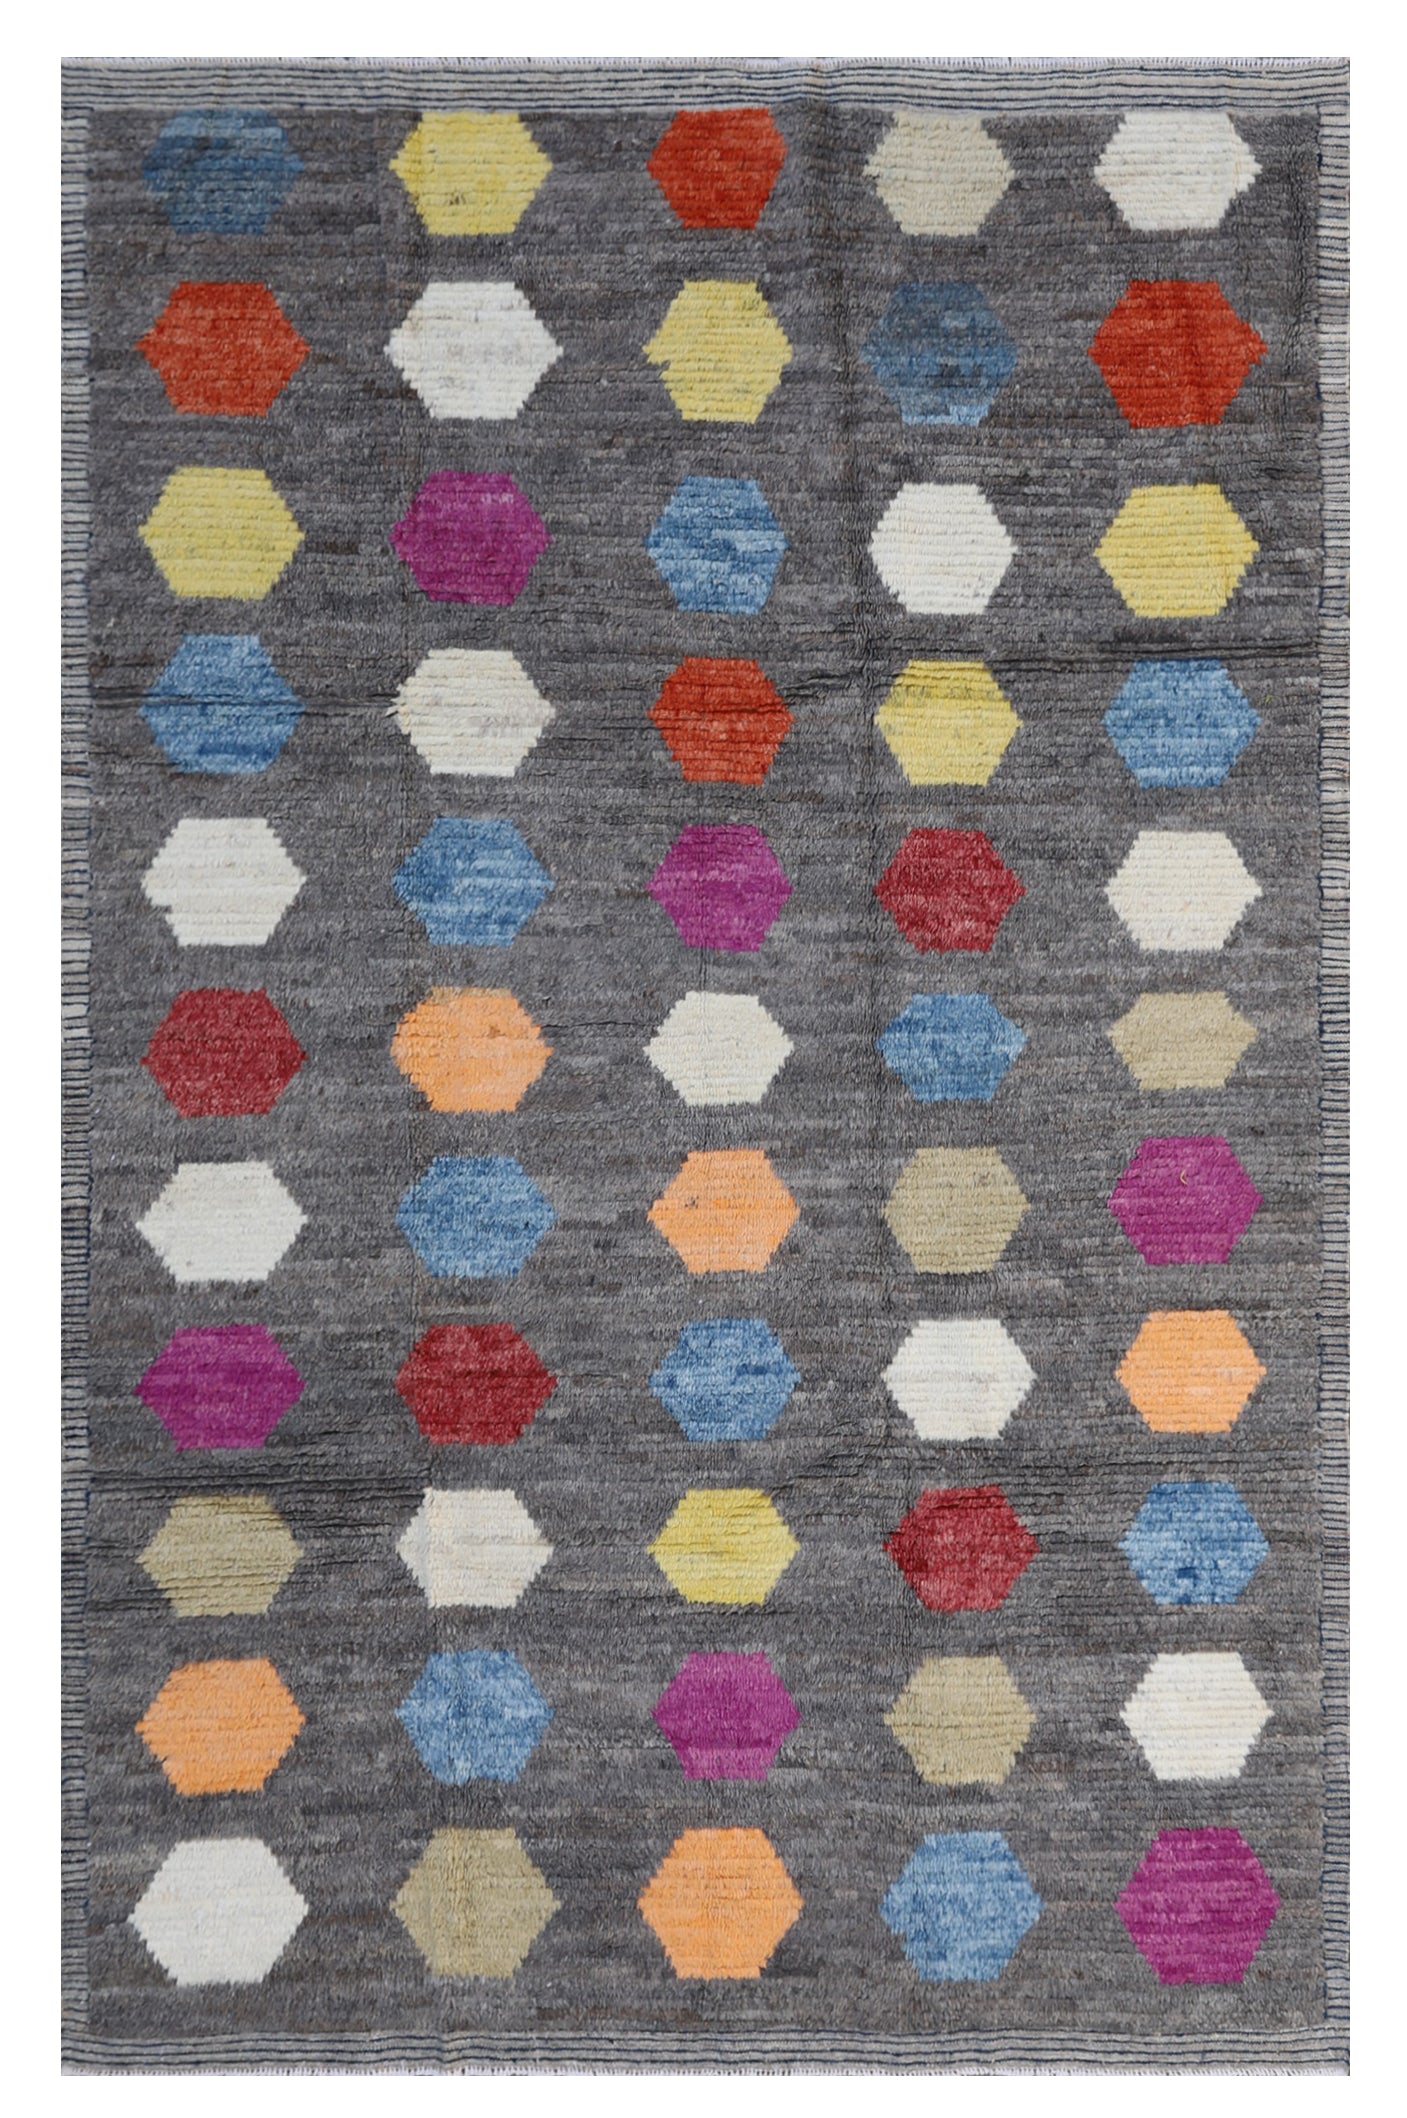 7'x9' Hand Knotted Moroccan Geometric Hexagon Pattern Long Pile Ariana Barchi Wool Area Rug